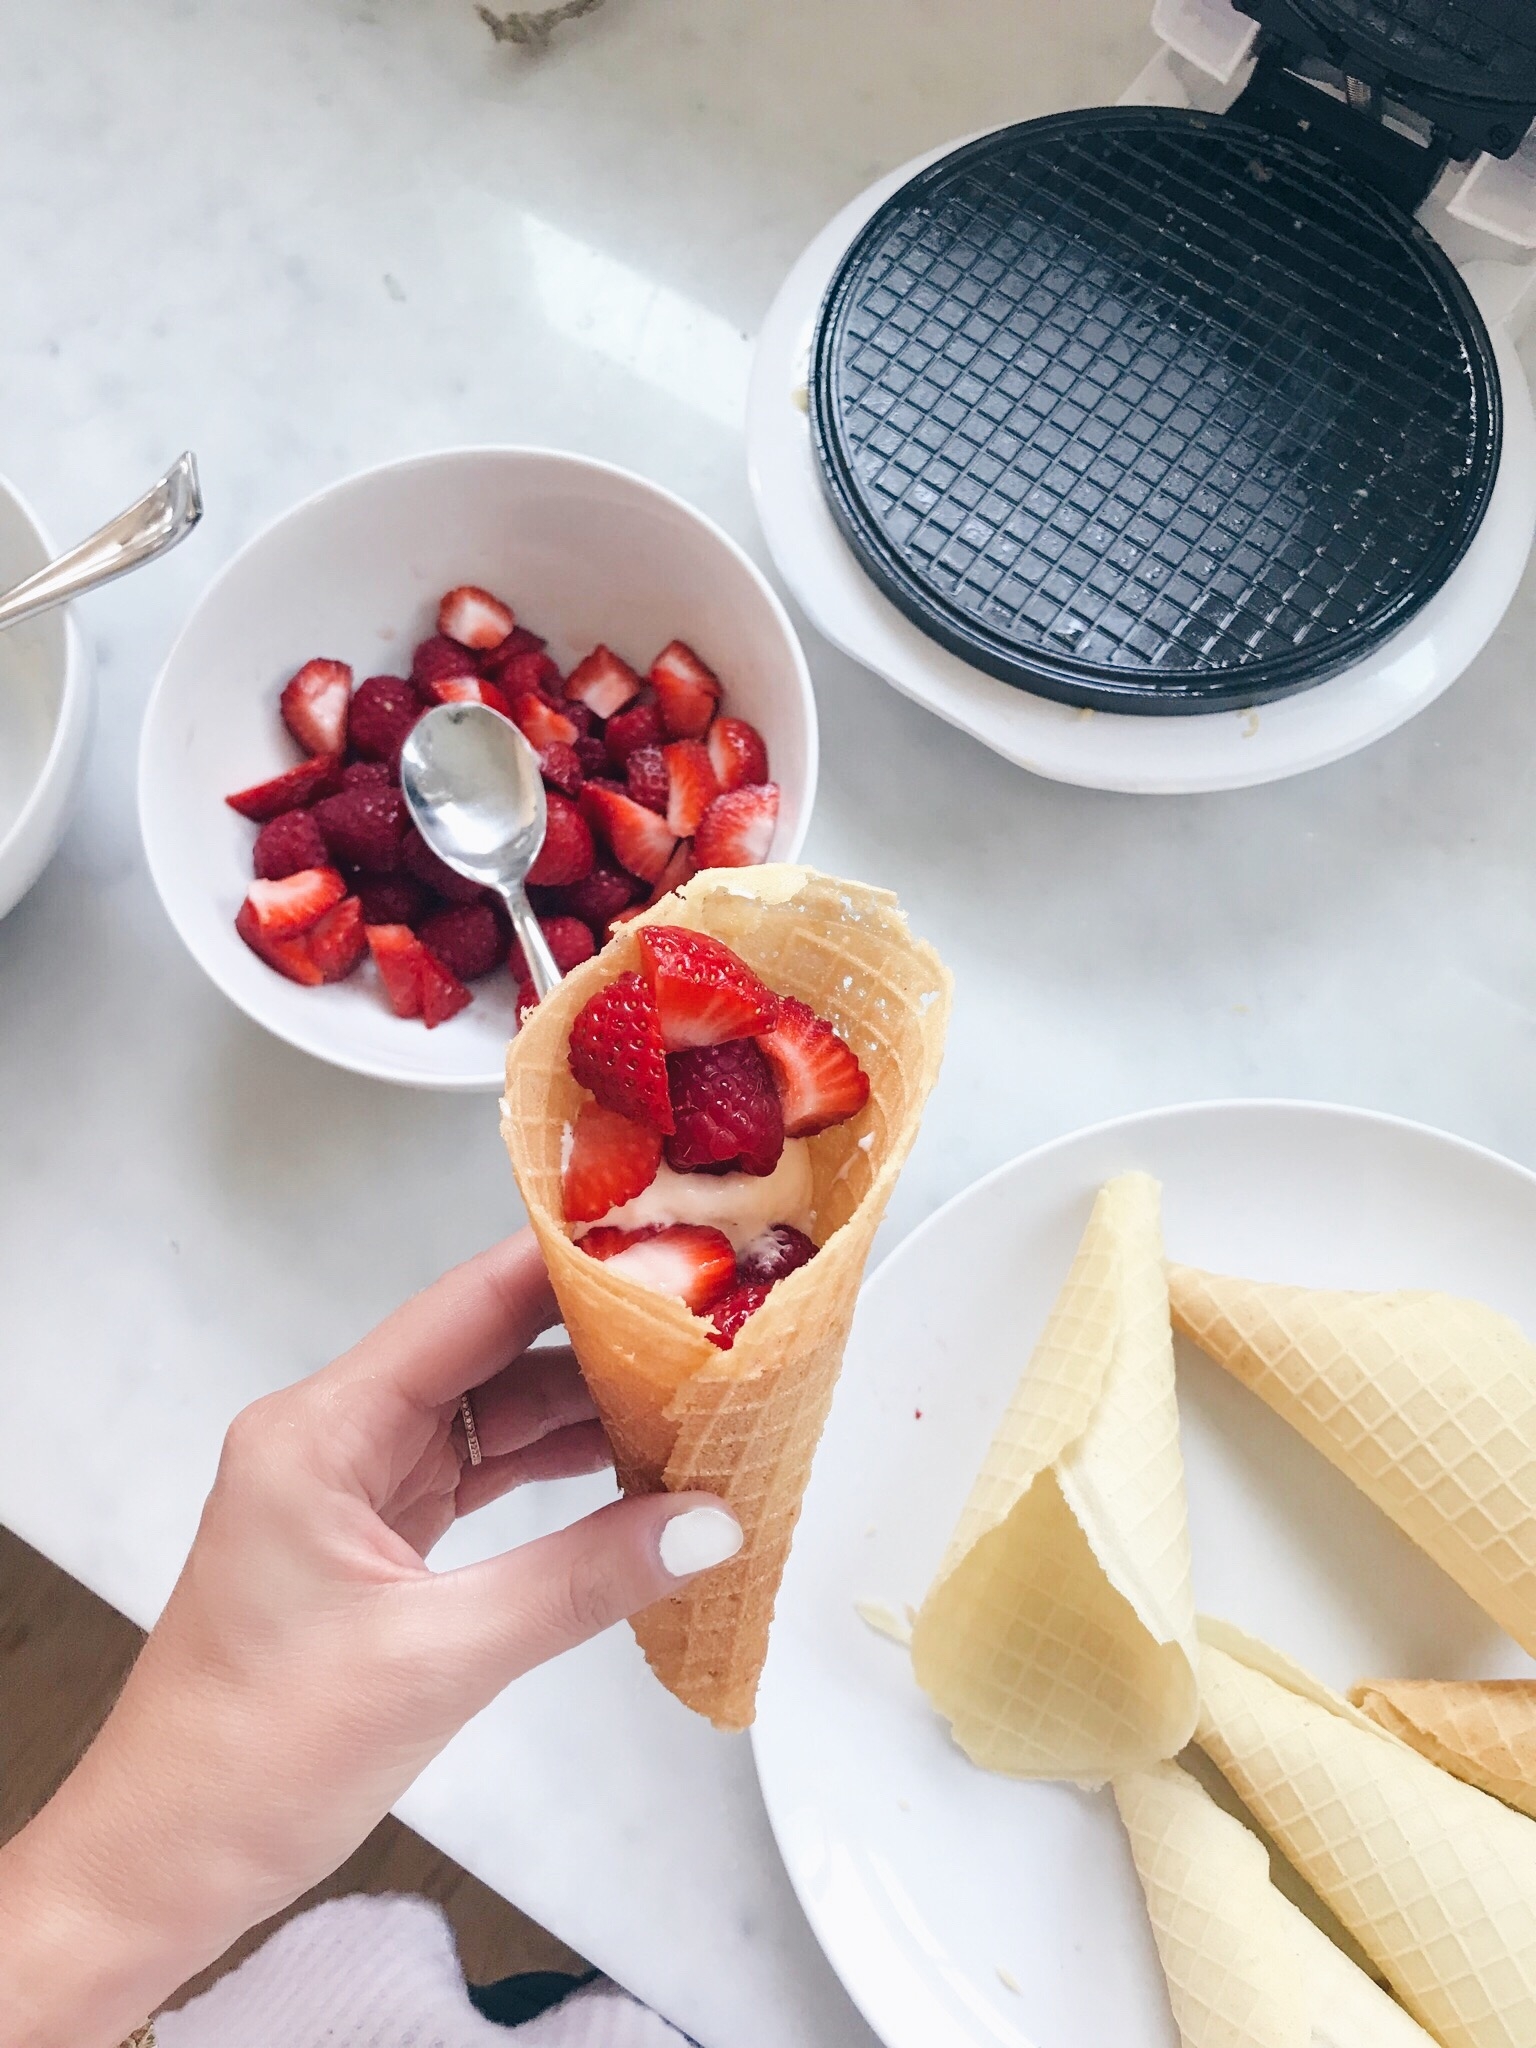 easy breakfast ideas for kids - homemade waffle cones filled with yogurt and fruit on pinteresting plans blog